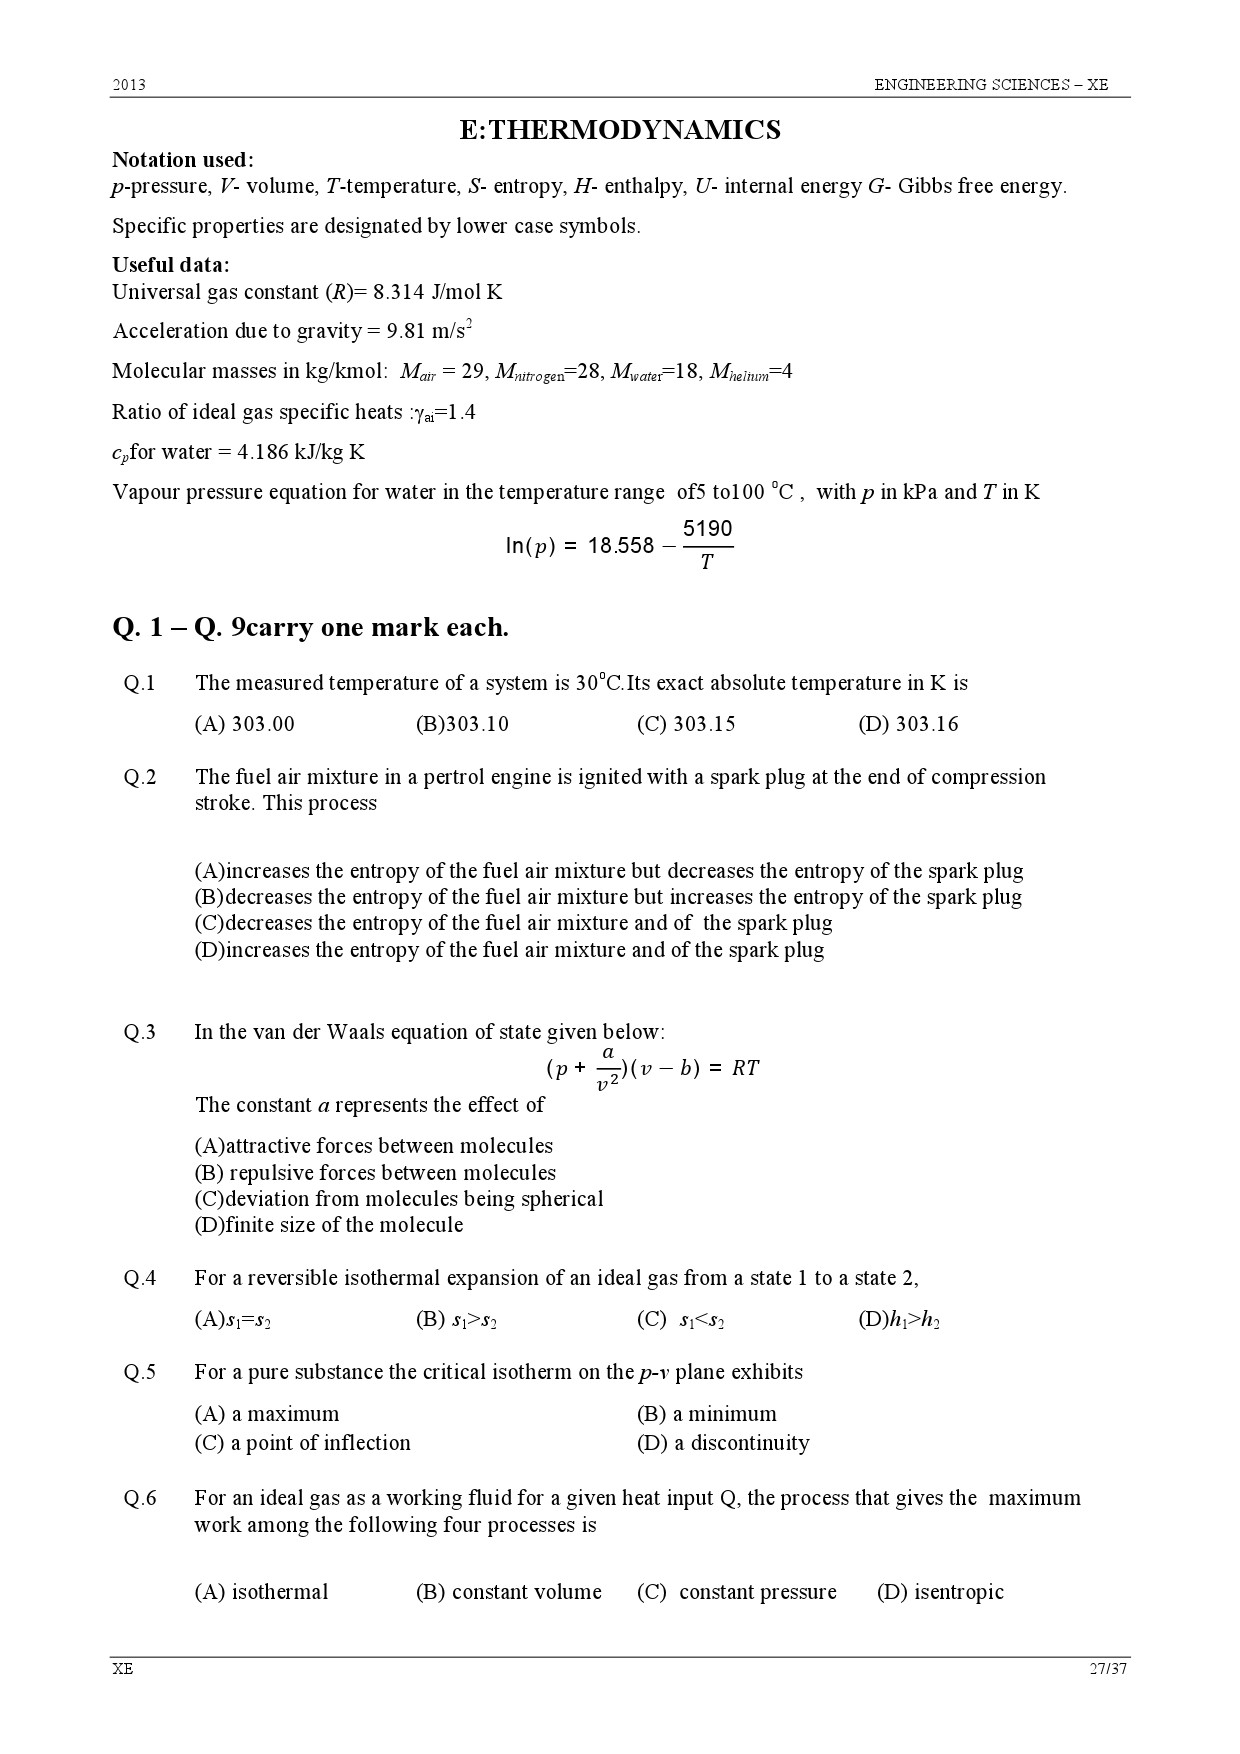 GATE Exam Question Paper 2013 Engineering Sciences 27